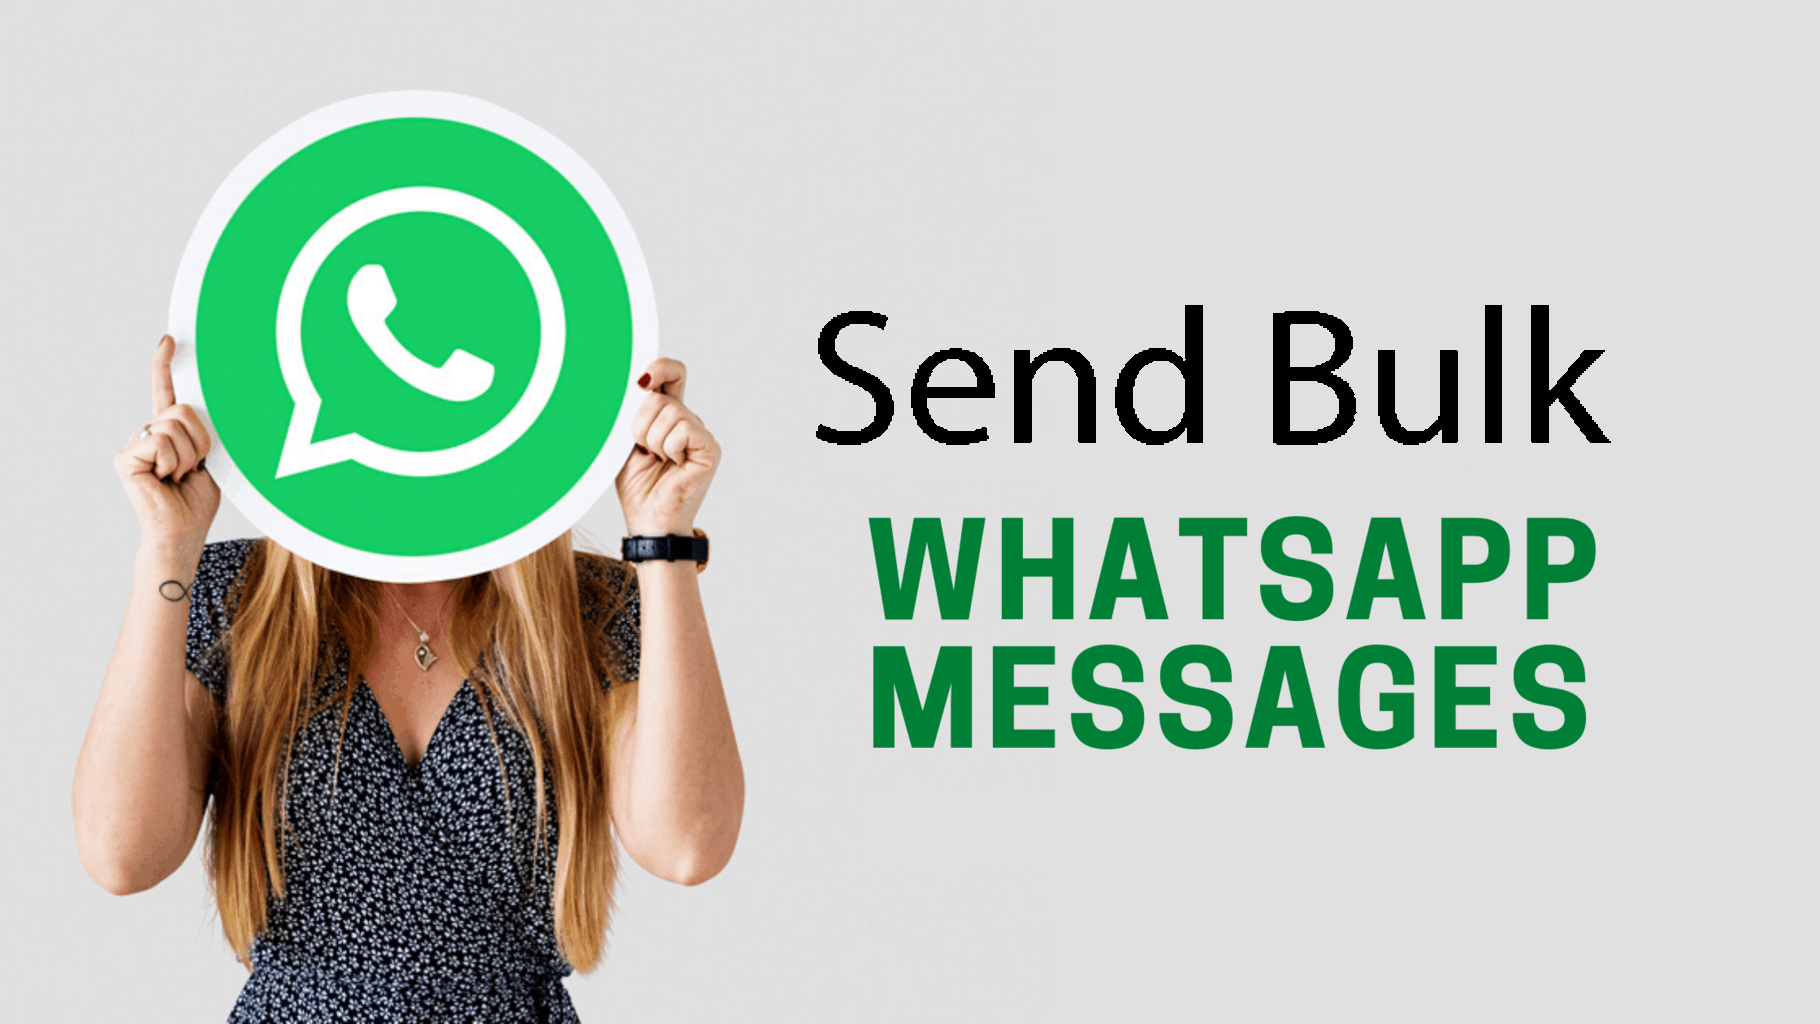 Bulk WhatsApp Messages: How To Send It?